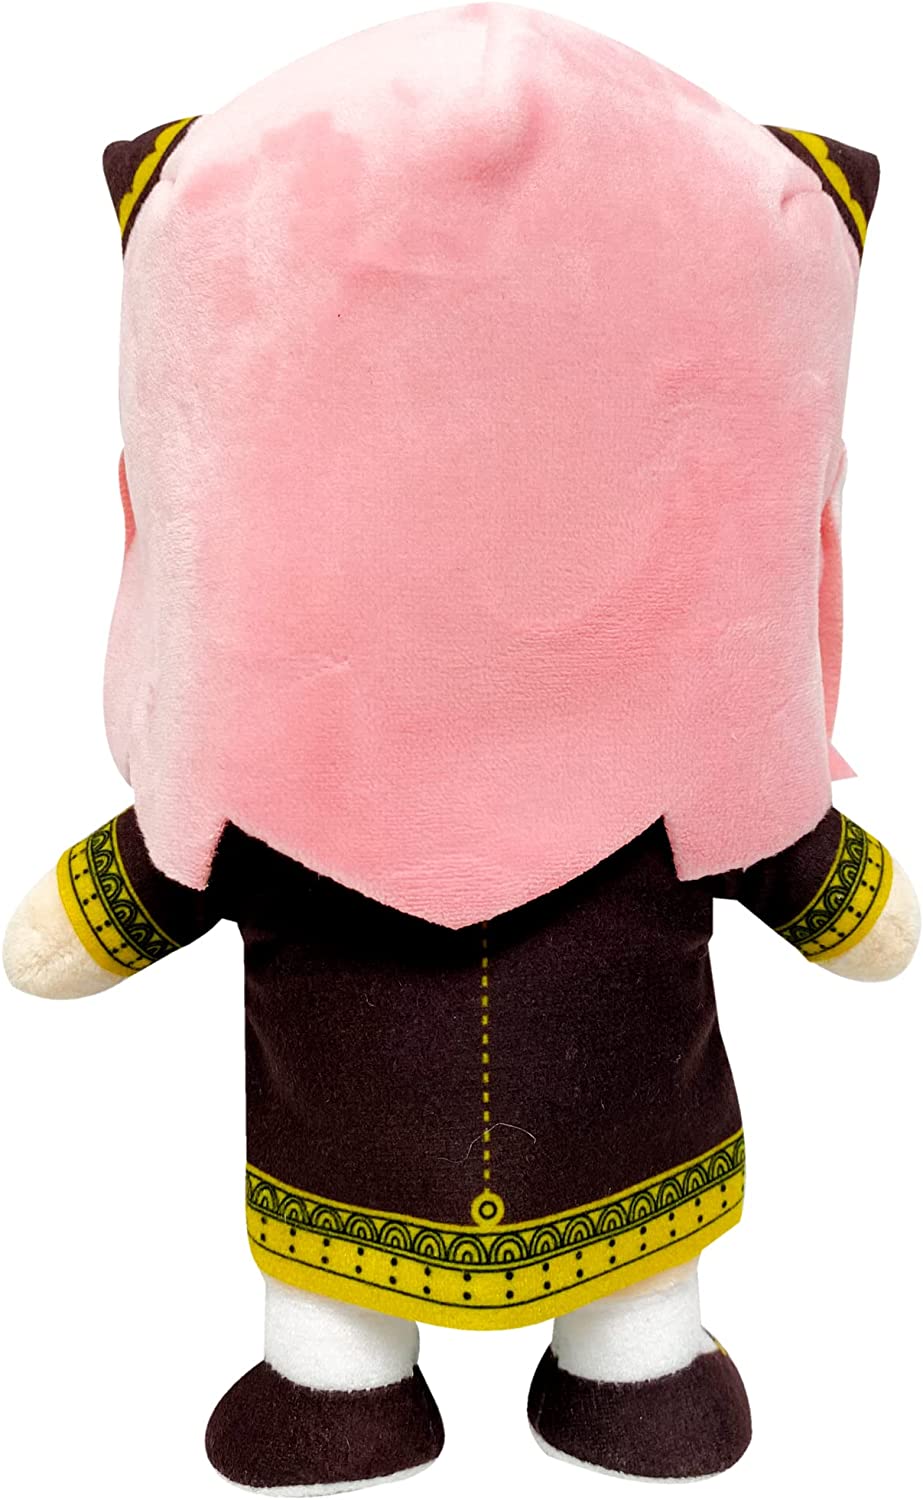 Spy X Family - Anya Forger Movable 7" Plush